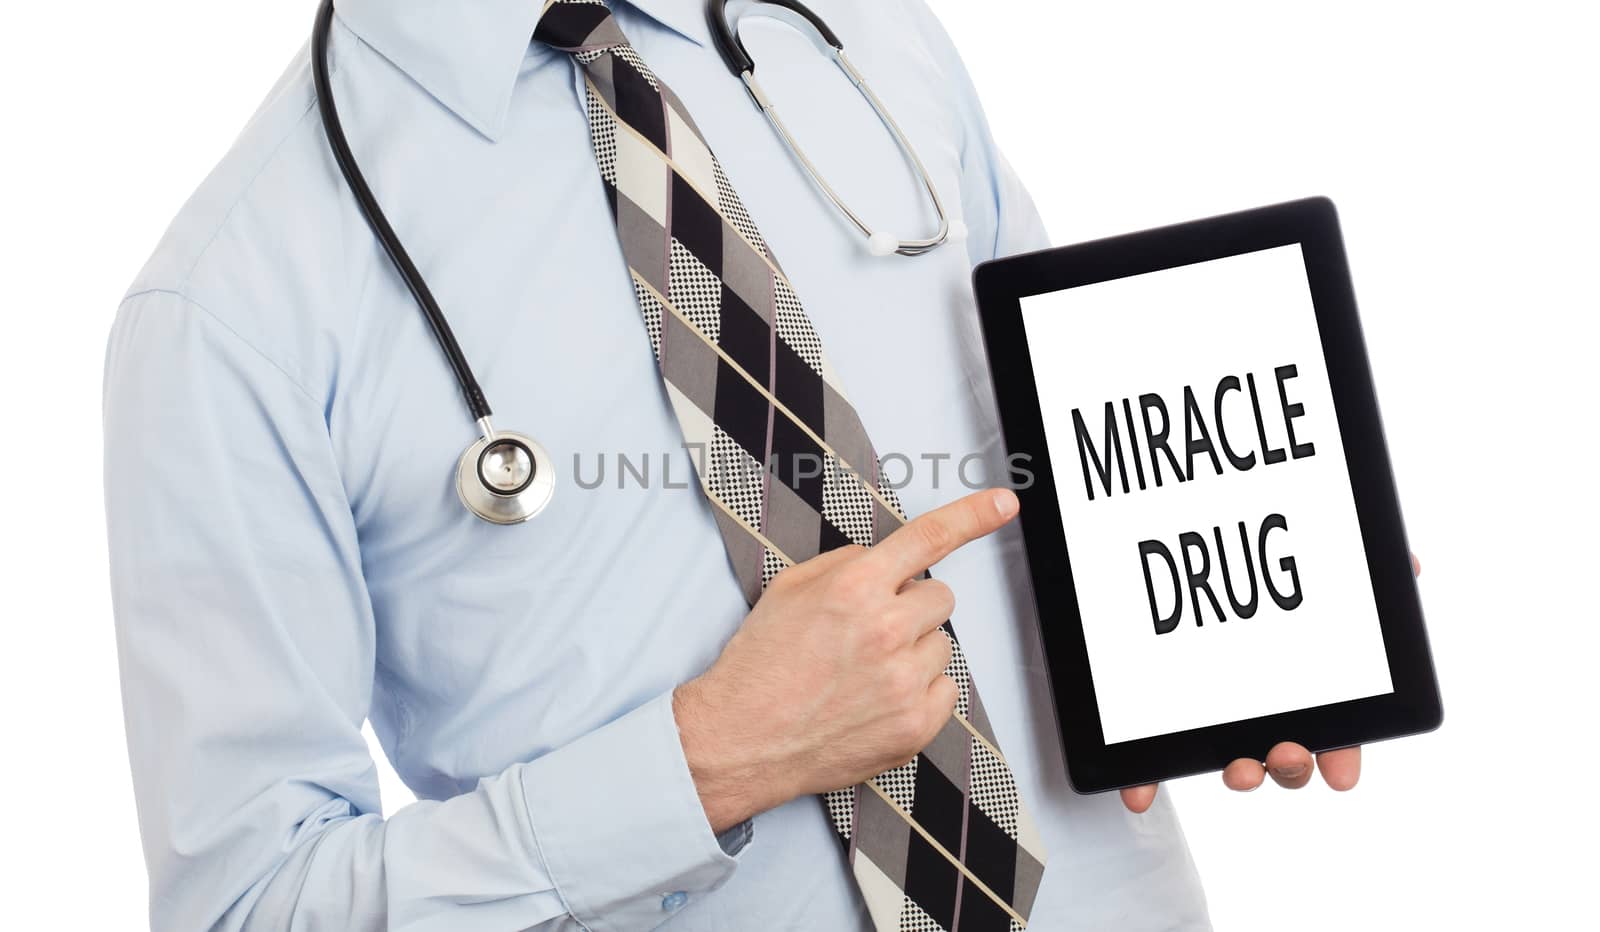 Doctor holding tablet - Miracle drug by michaklootwijk